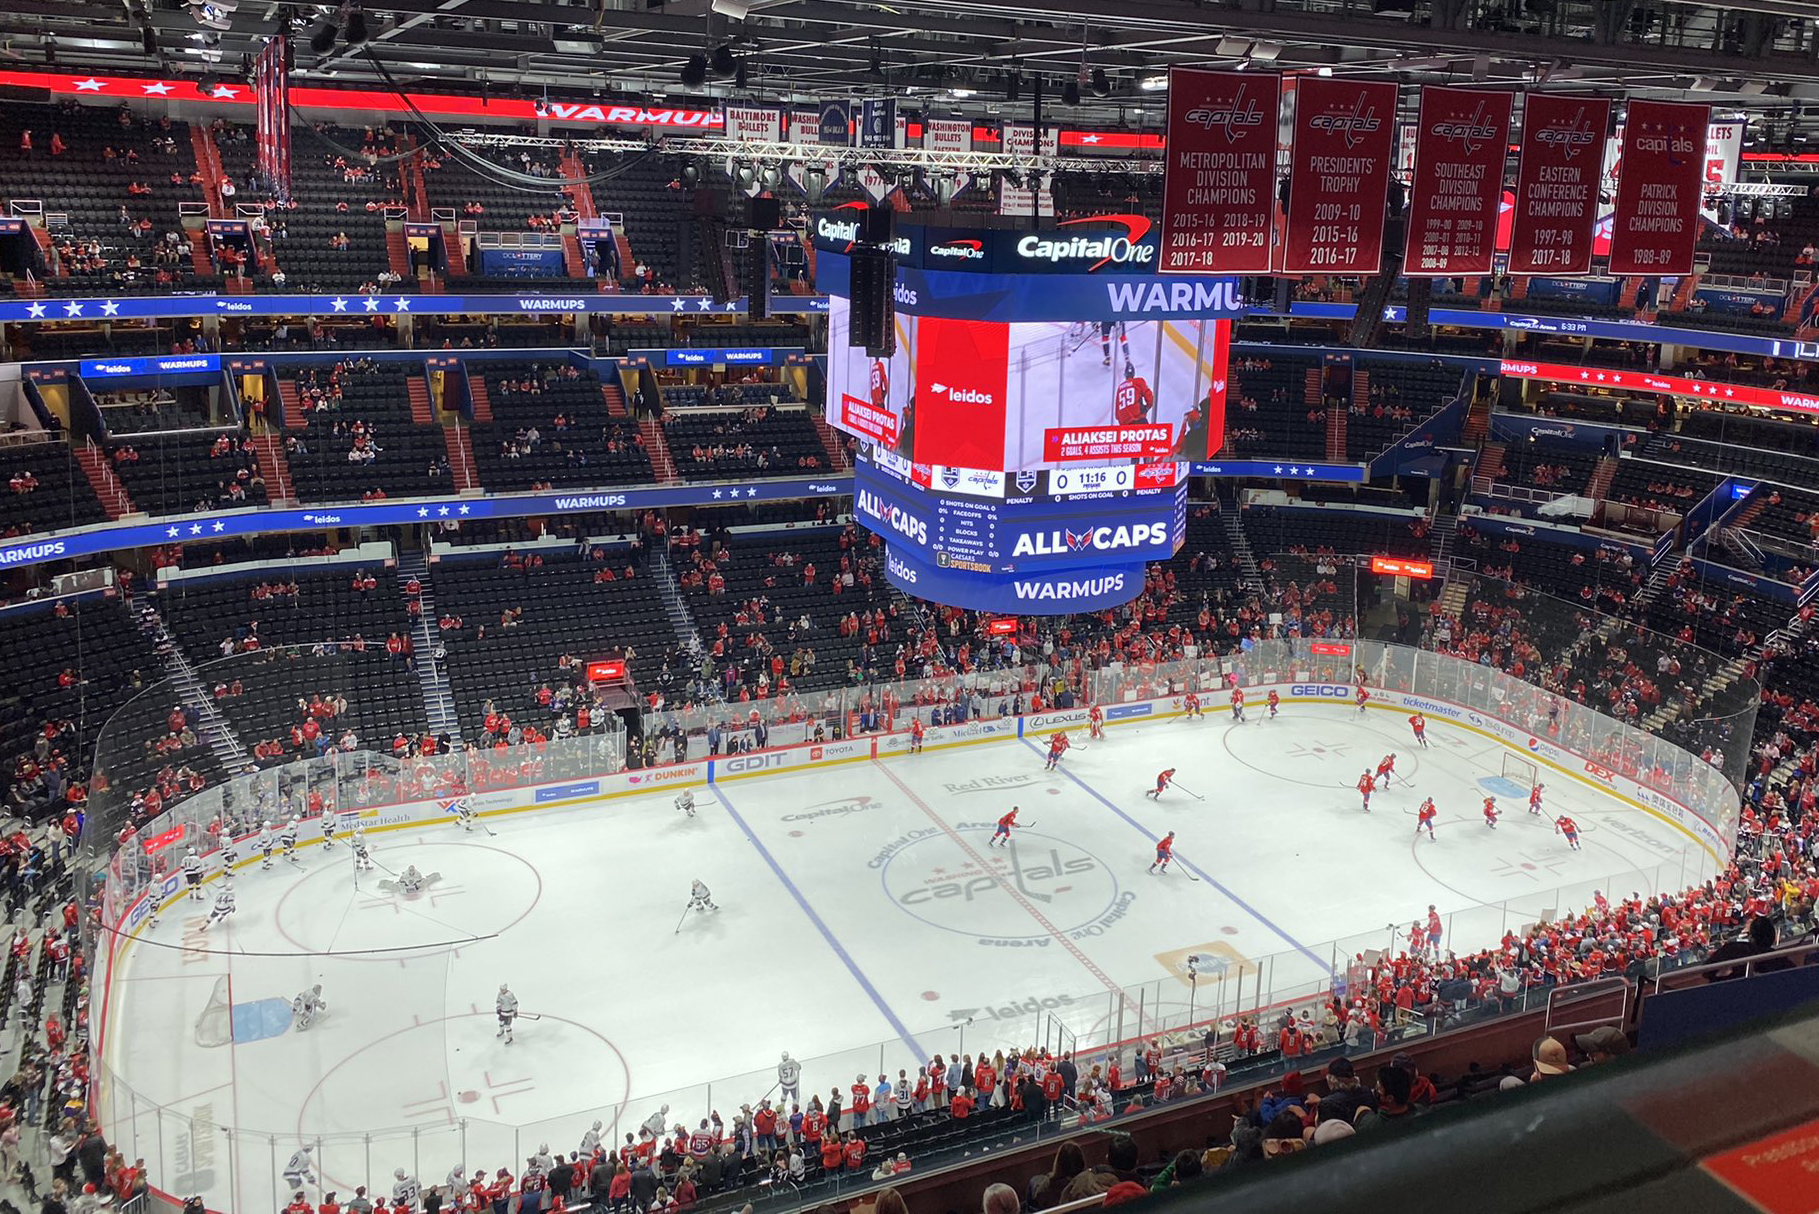 Capital One Arena, home to the NHL's Capitals.